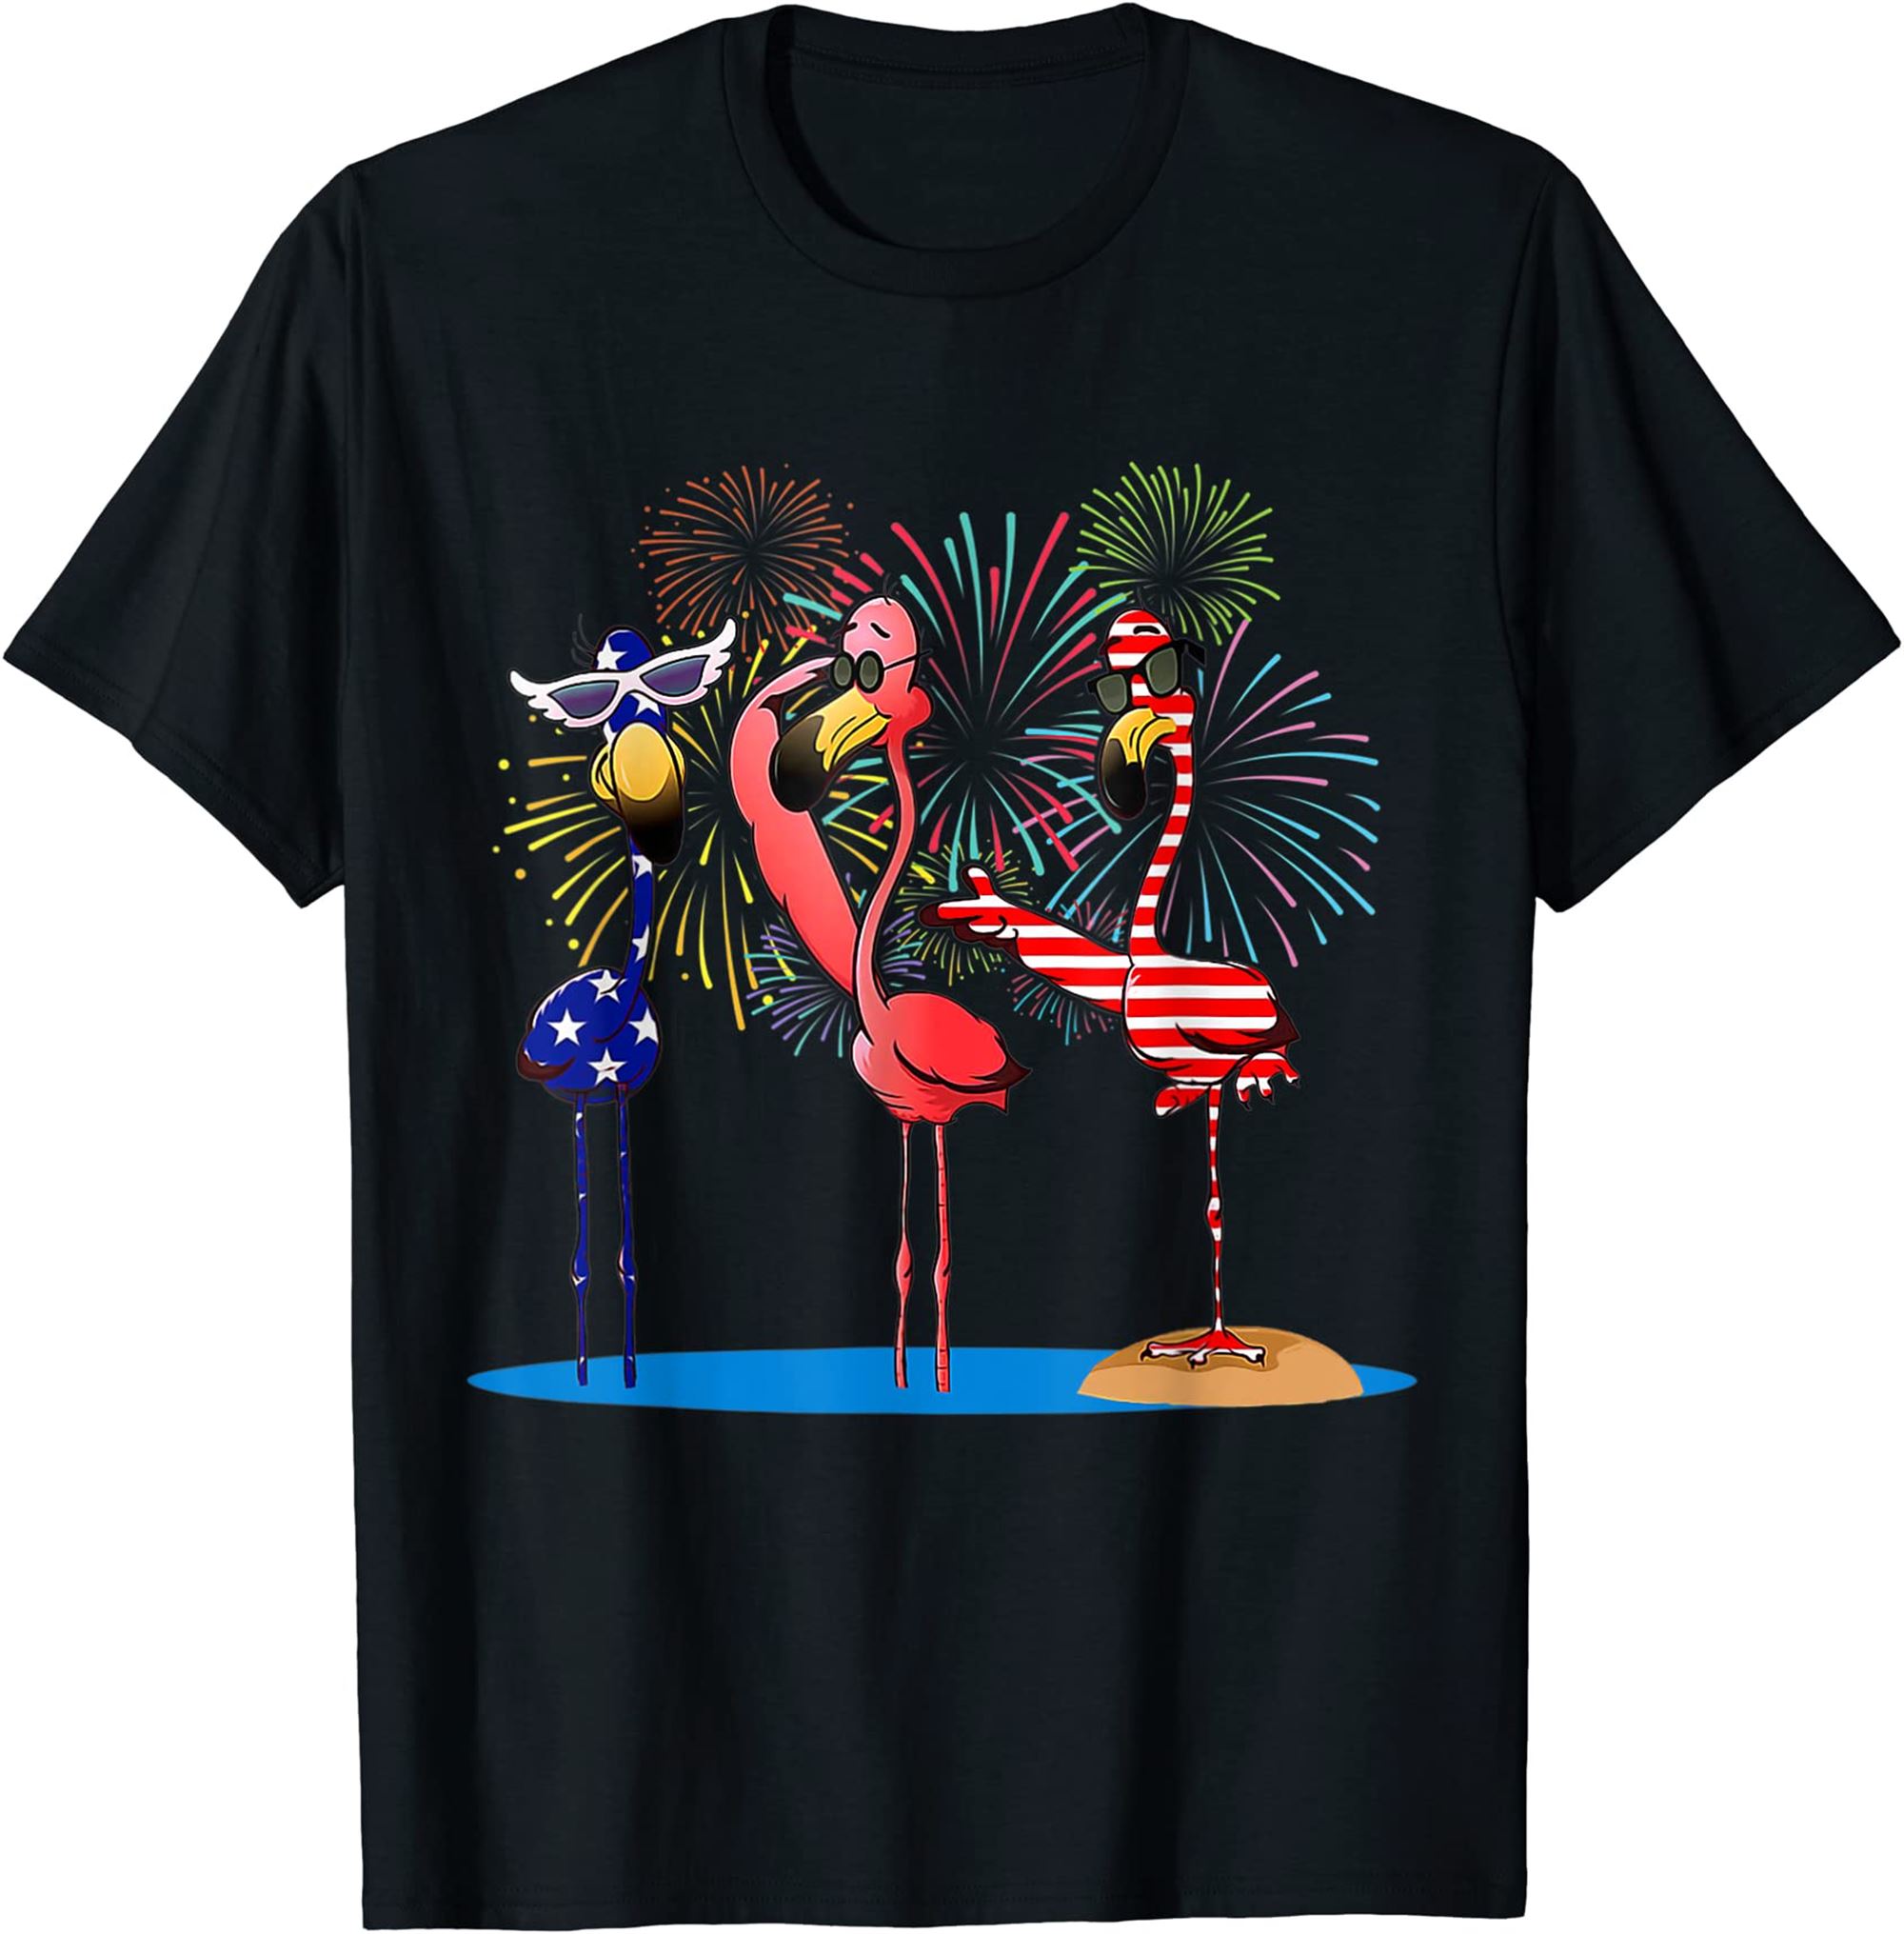 Flamingo 4th Of July American Flag Flamingo Independence T-shirt Full Size Up To 5xl